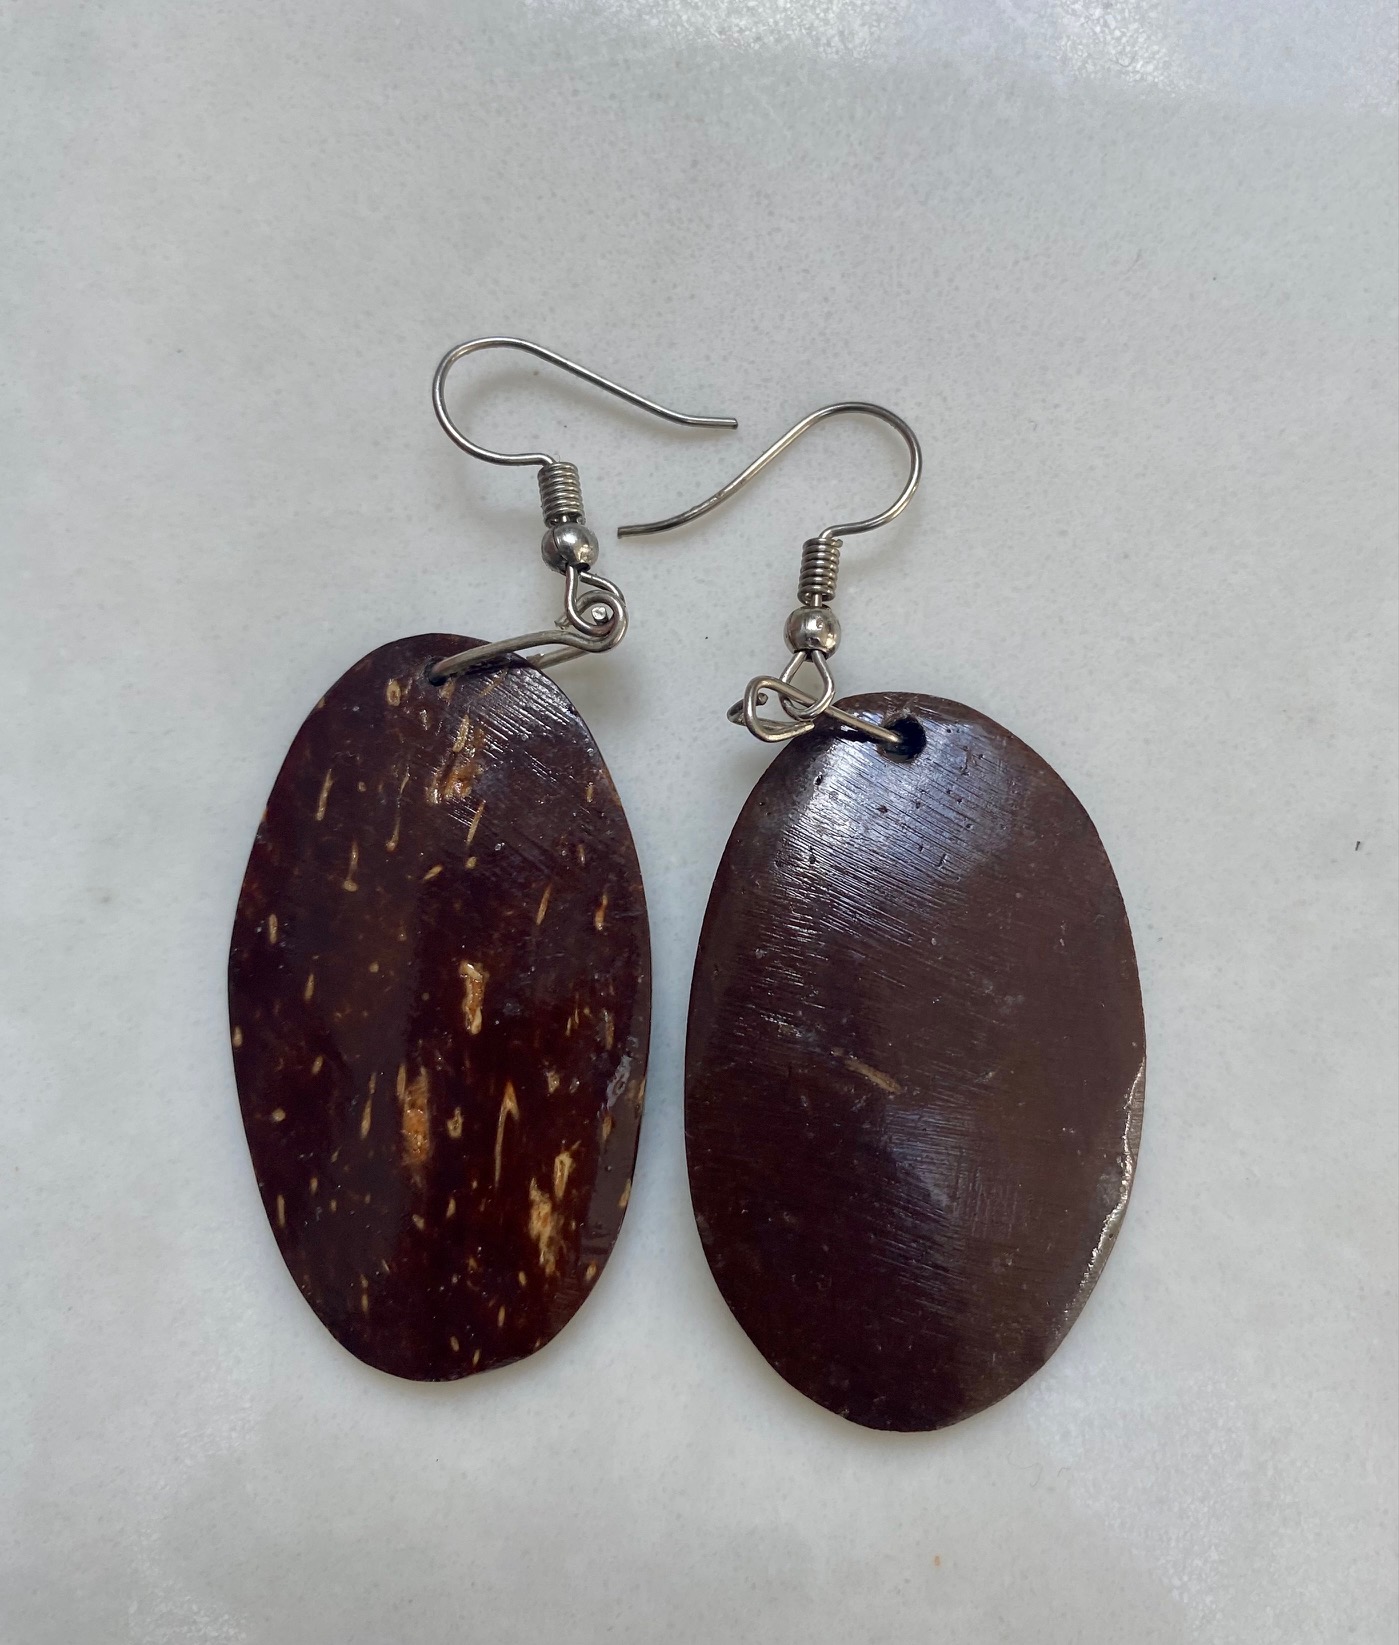 Women Handmade Coconut Shell Earrings and Neckless Set, NEW Fashion Jewelry  | Coconut shell, Coconut shell crafts, Shell earrings